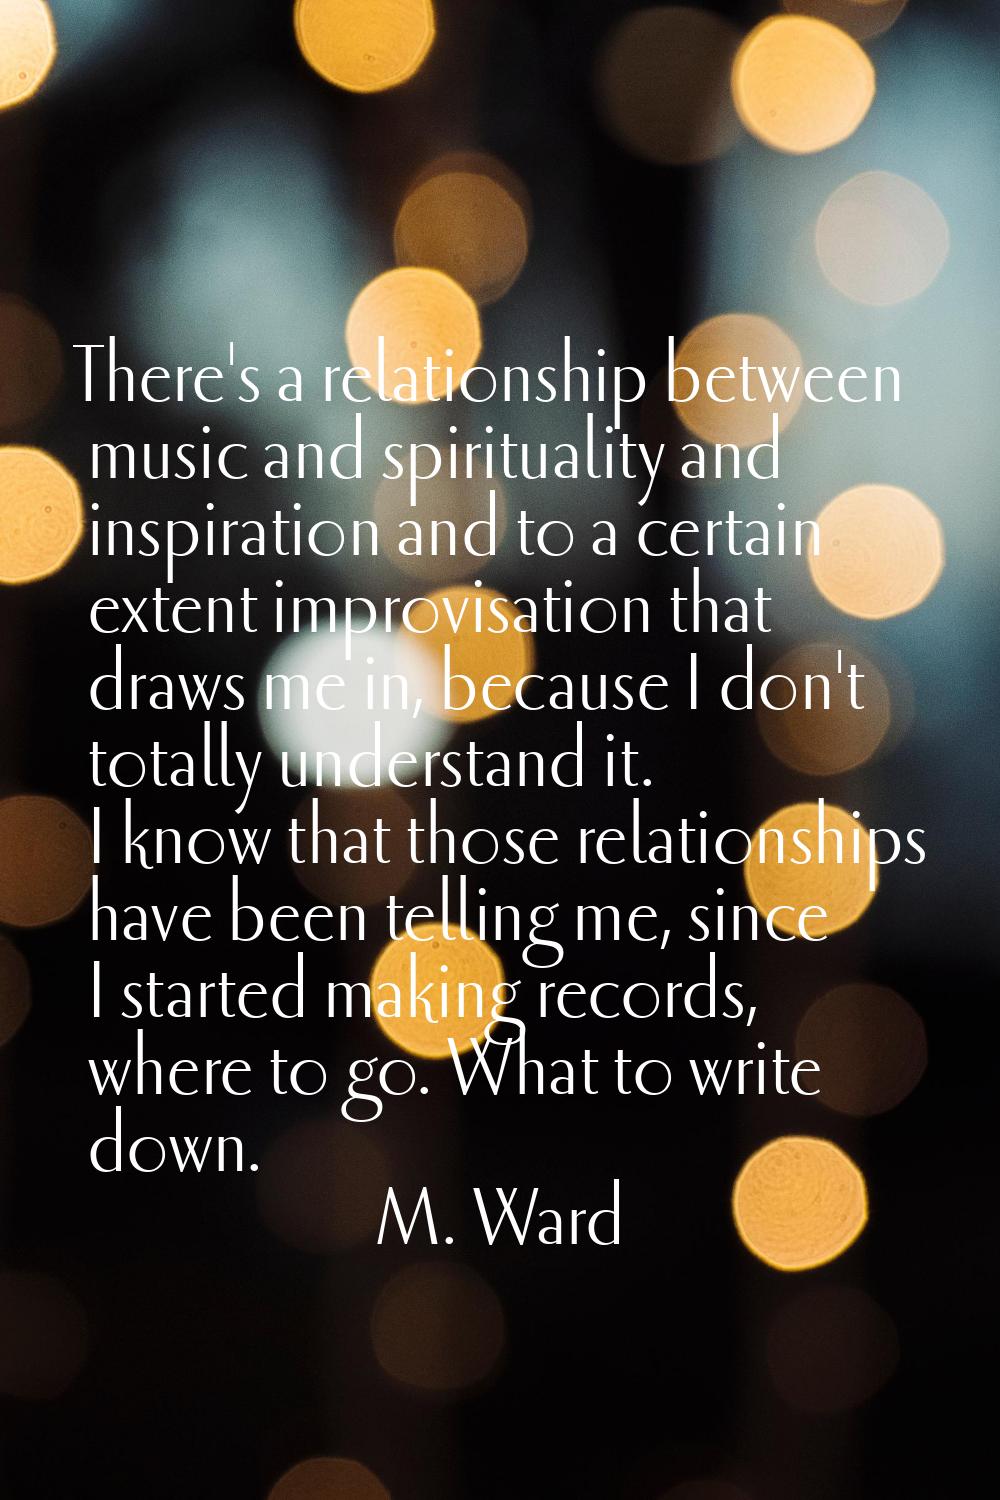 There's a relationship between music and spirituality and inspiration and to a certain extent impro